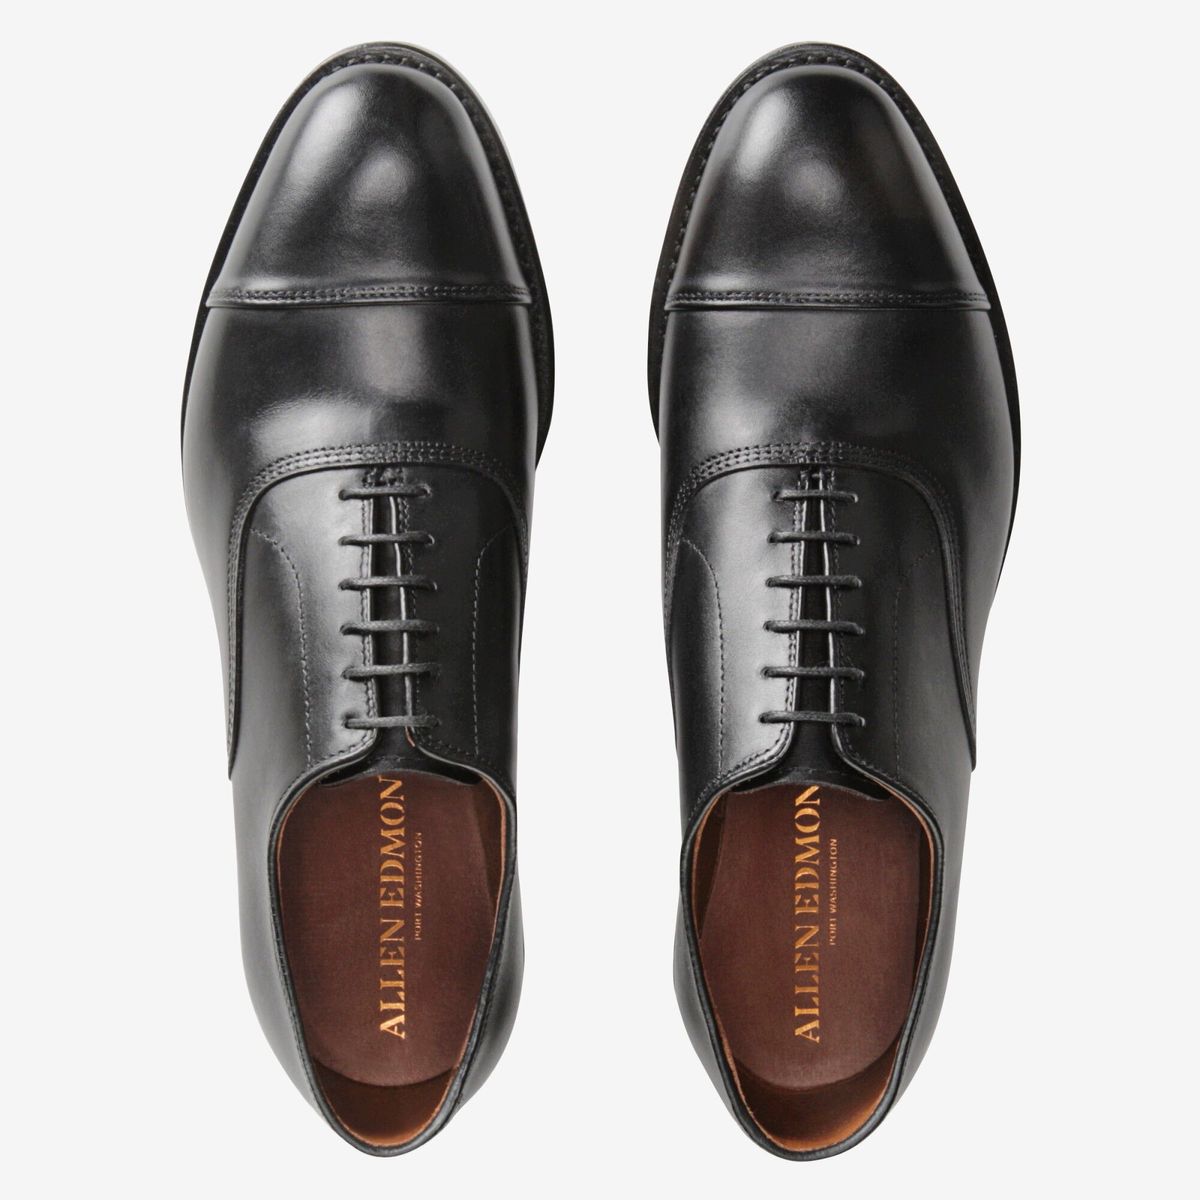 A Glossary of Dress Shoe Styles -- Names, Photos, and Descriptions